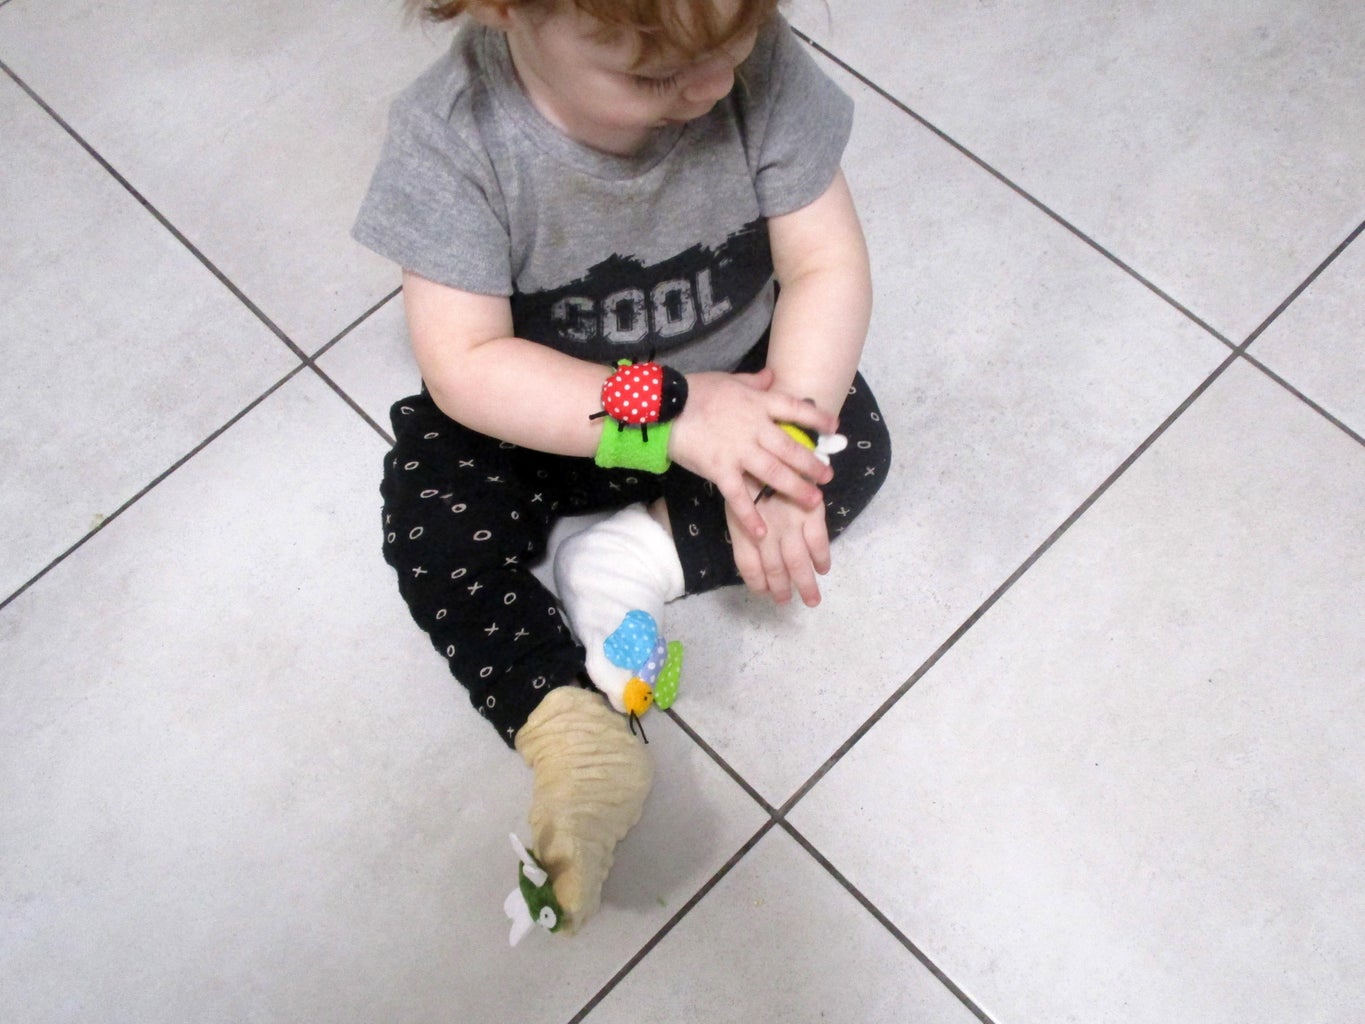 DIY Wrist Rattles and Foot Finder Socks - a Wearable Sensory Toy